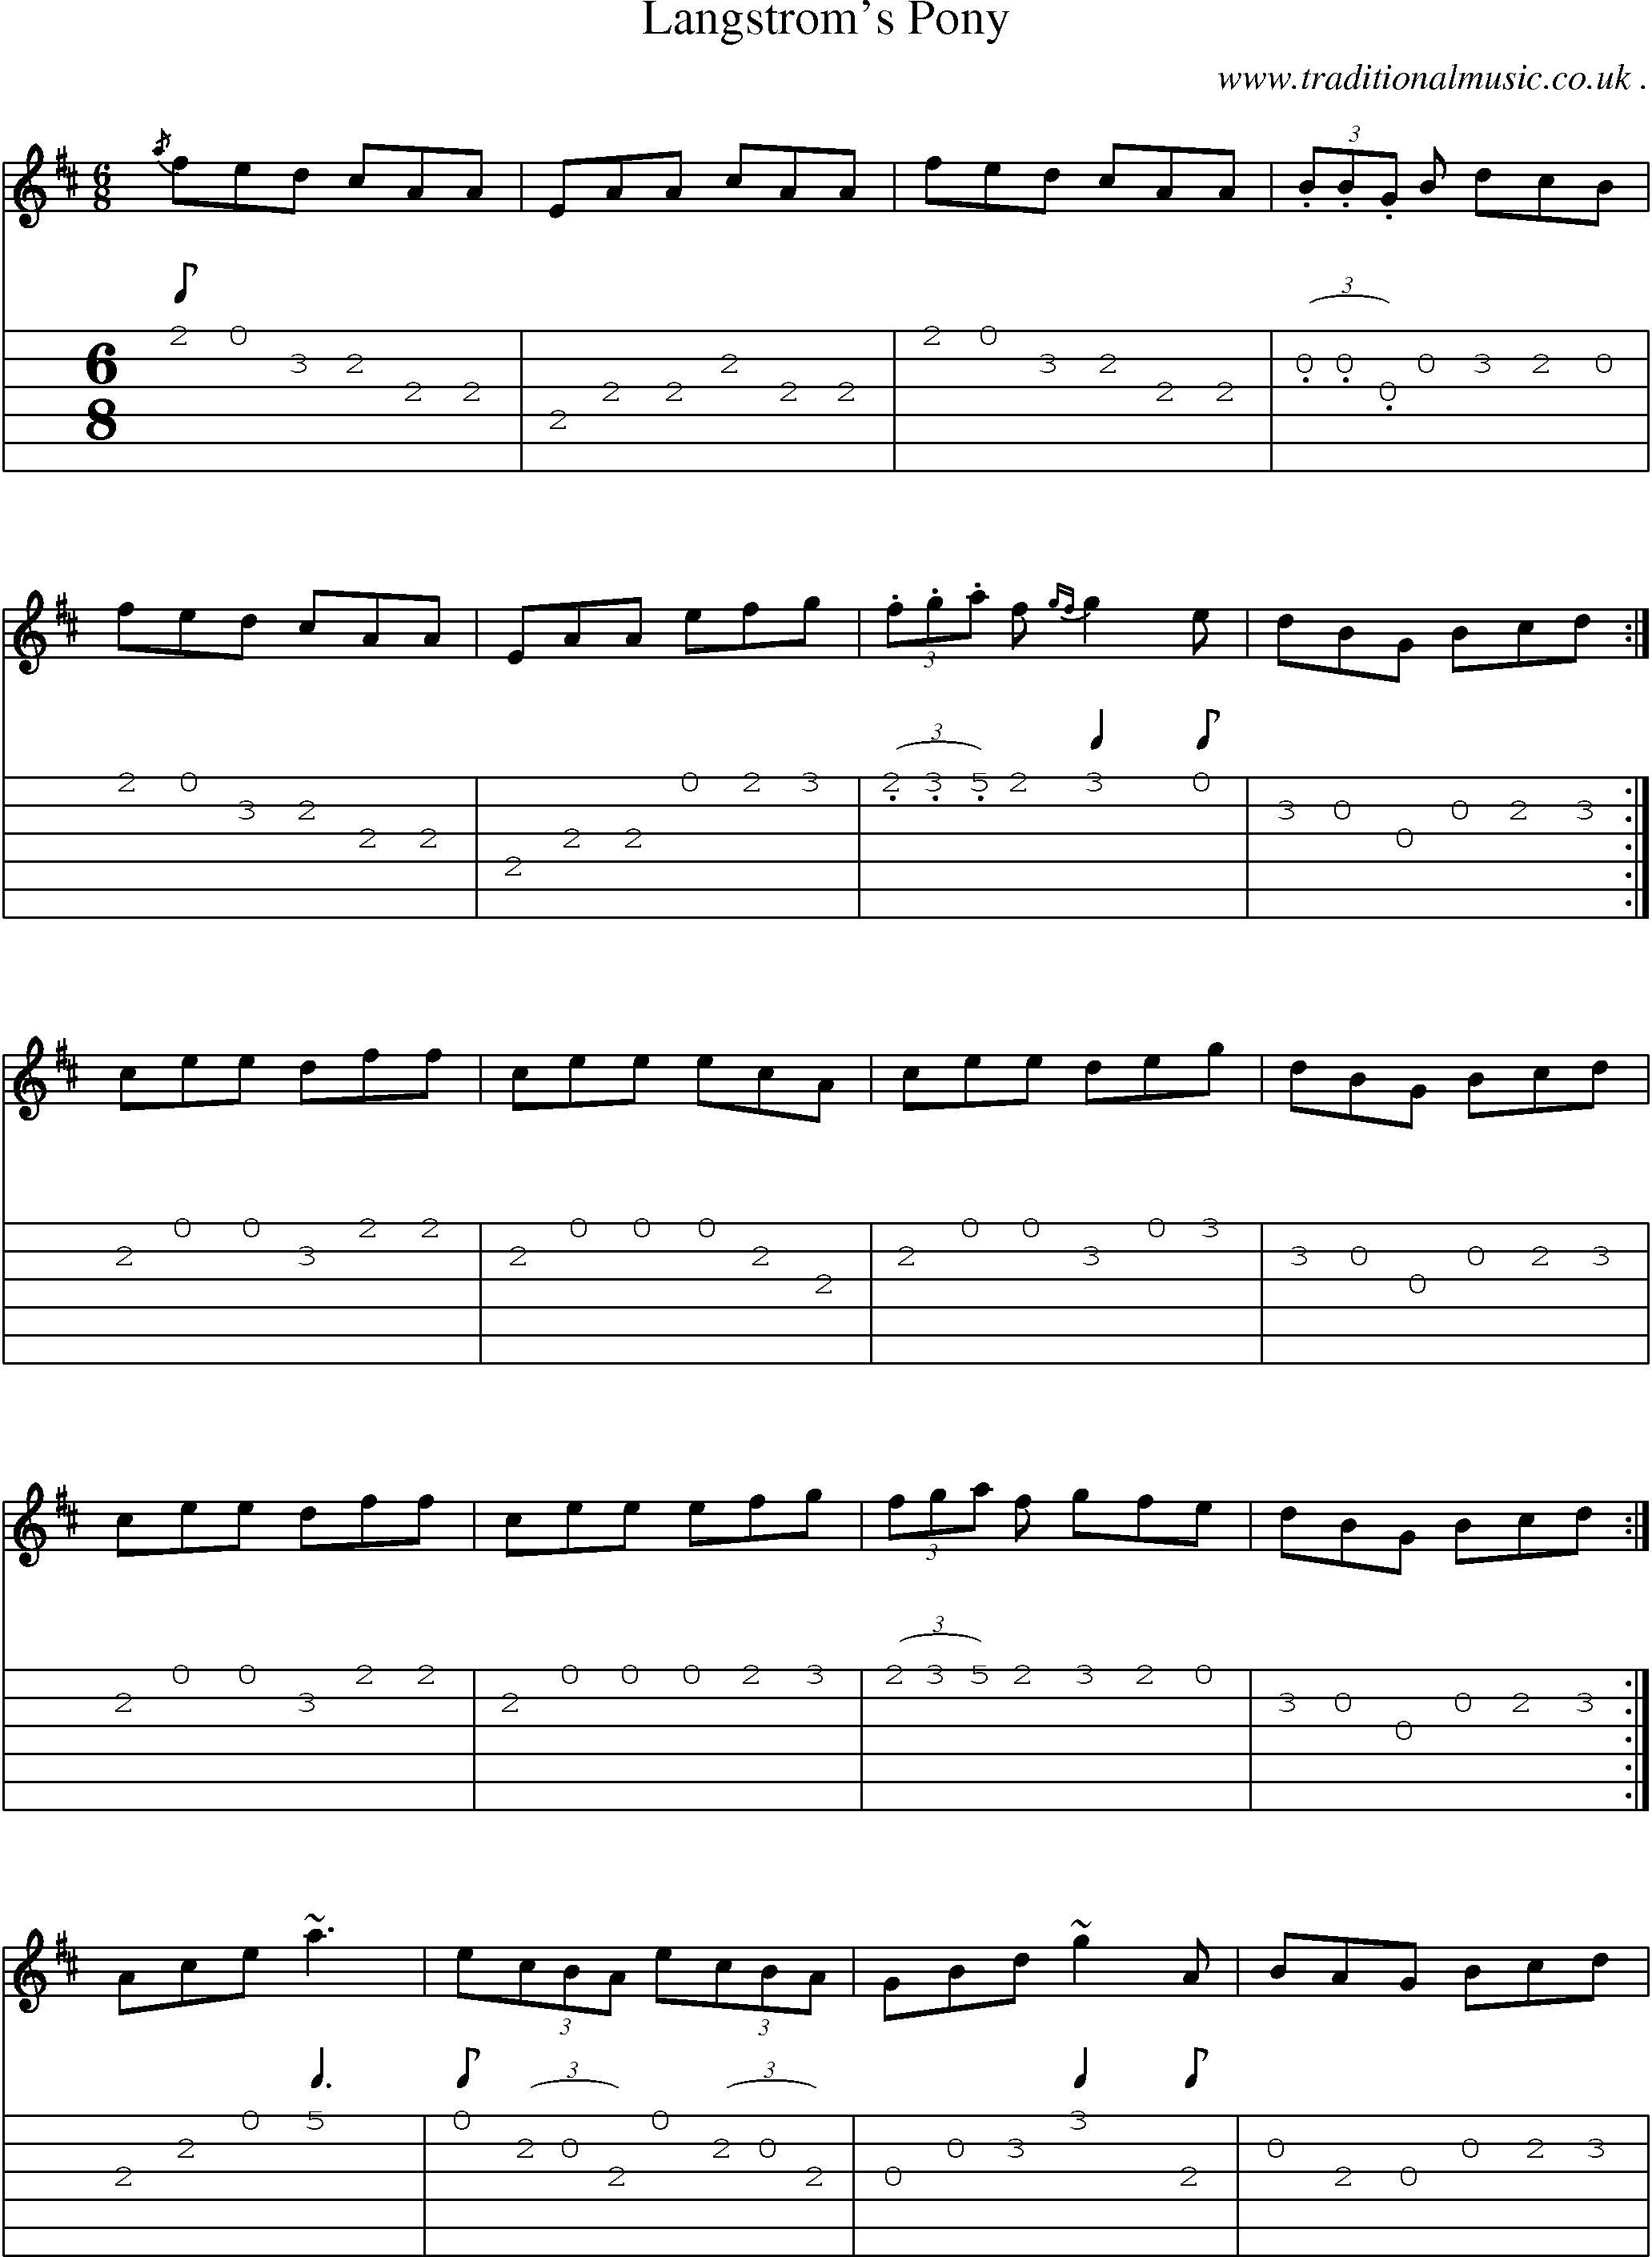 Sheet-music  score, Chords and Guitar Tabs for Langstroms Pony